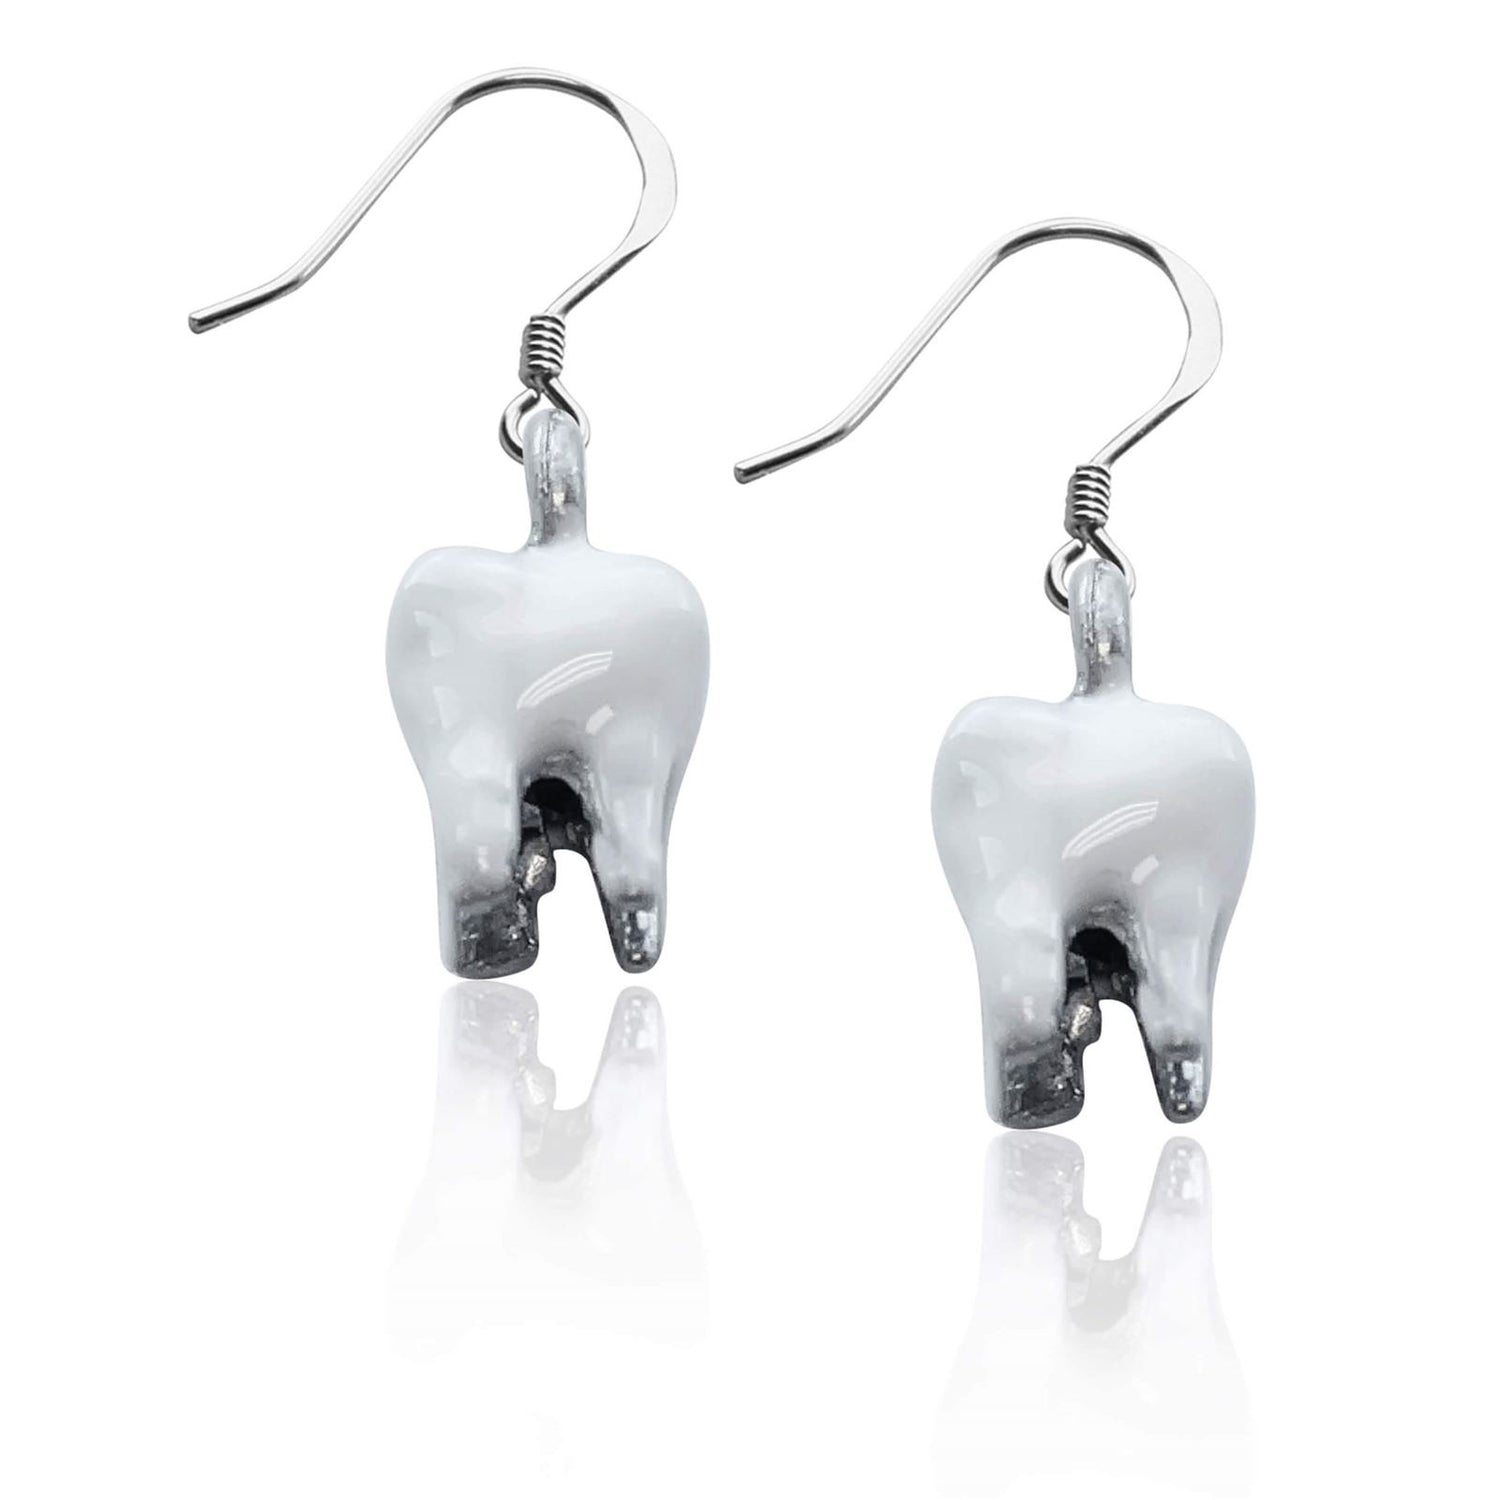 Whimsical Gifts | Tooth Charm Earrings in Silver Finish | Professions Themed | Dental | Medical | First Responder | Jewelry